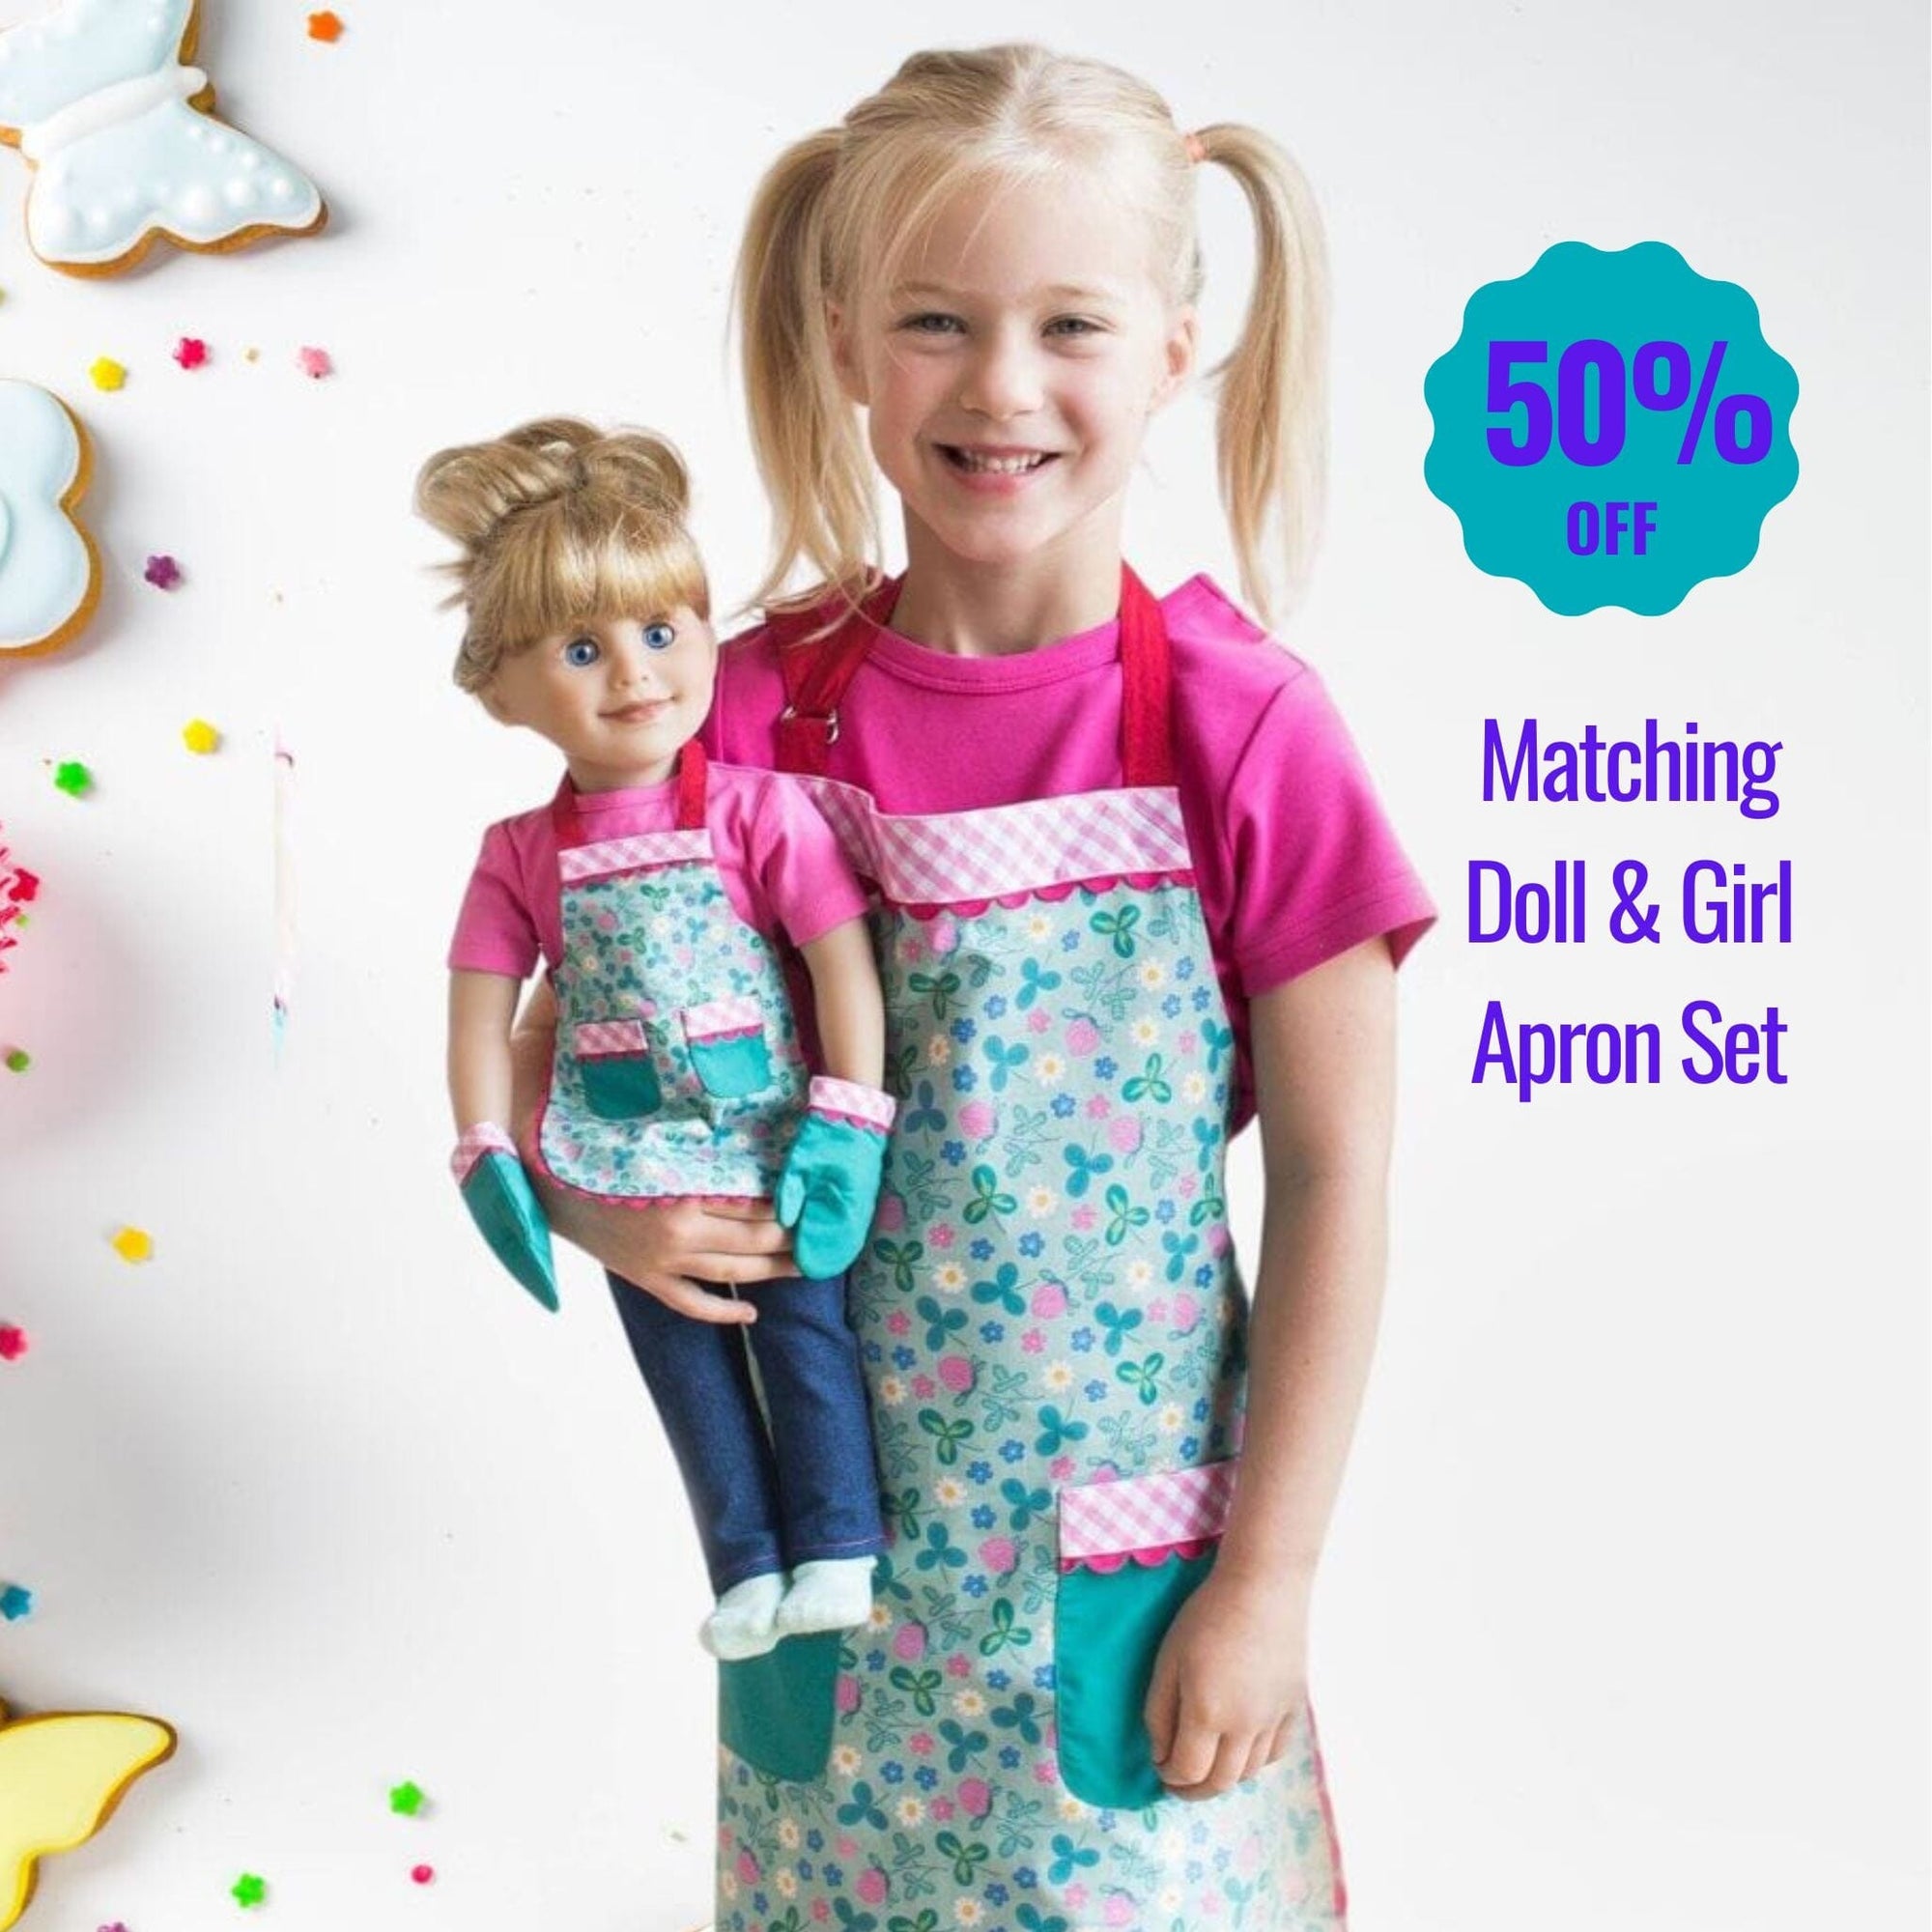 Kitchen Creations Apron Set for Doll and Kids